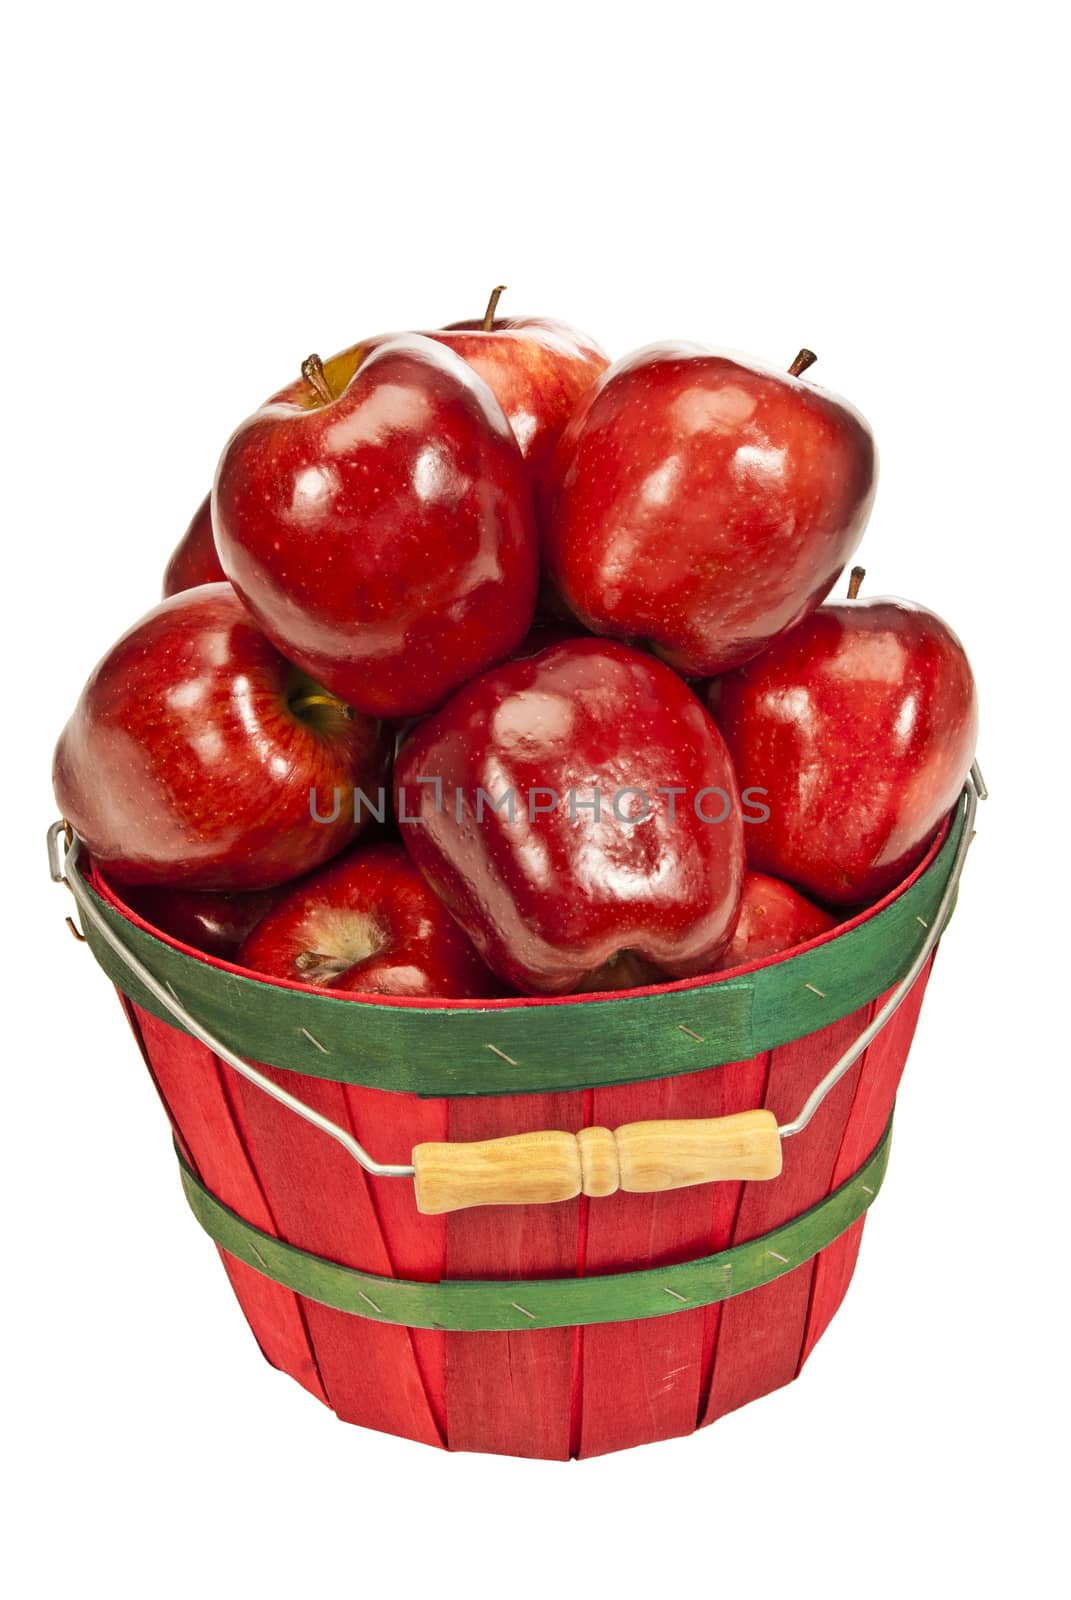 Red Apples In Red Basket by stockbuster1